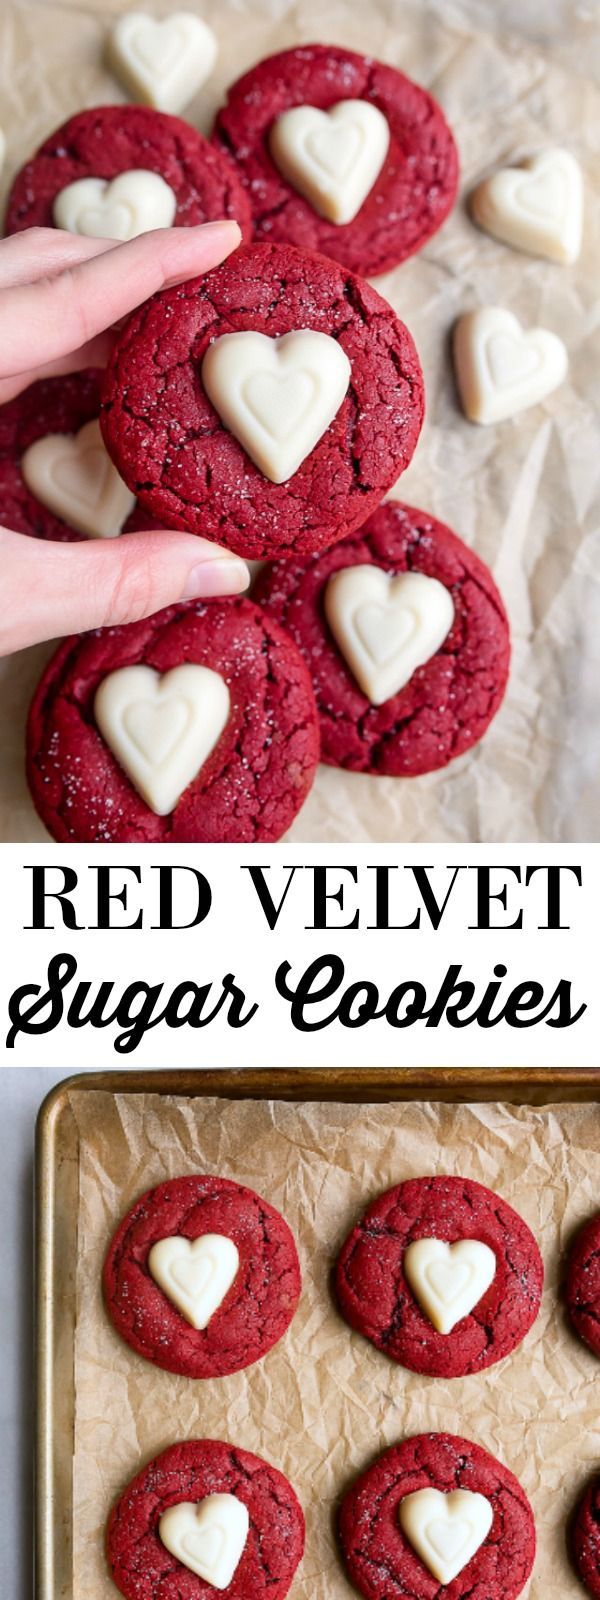 Small batch cookies: red velvet sugar cookies for Valentines Day dessert for two.